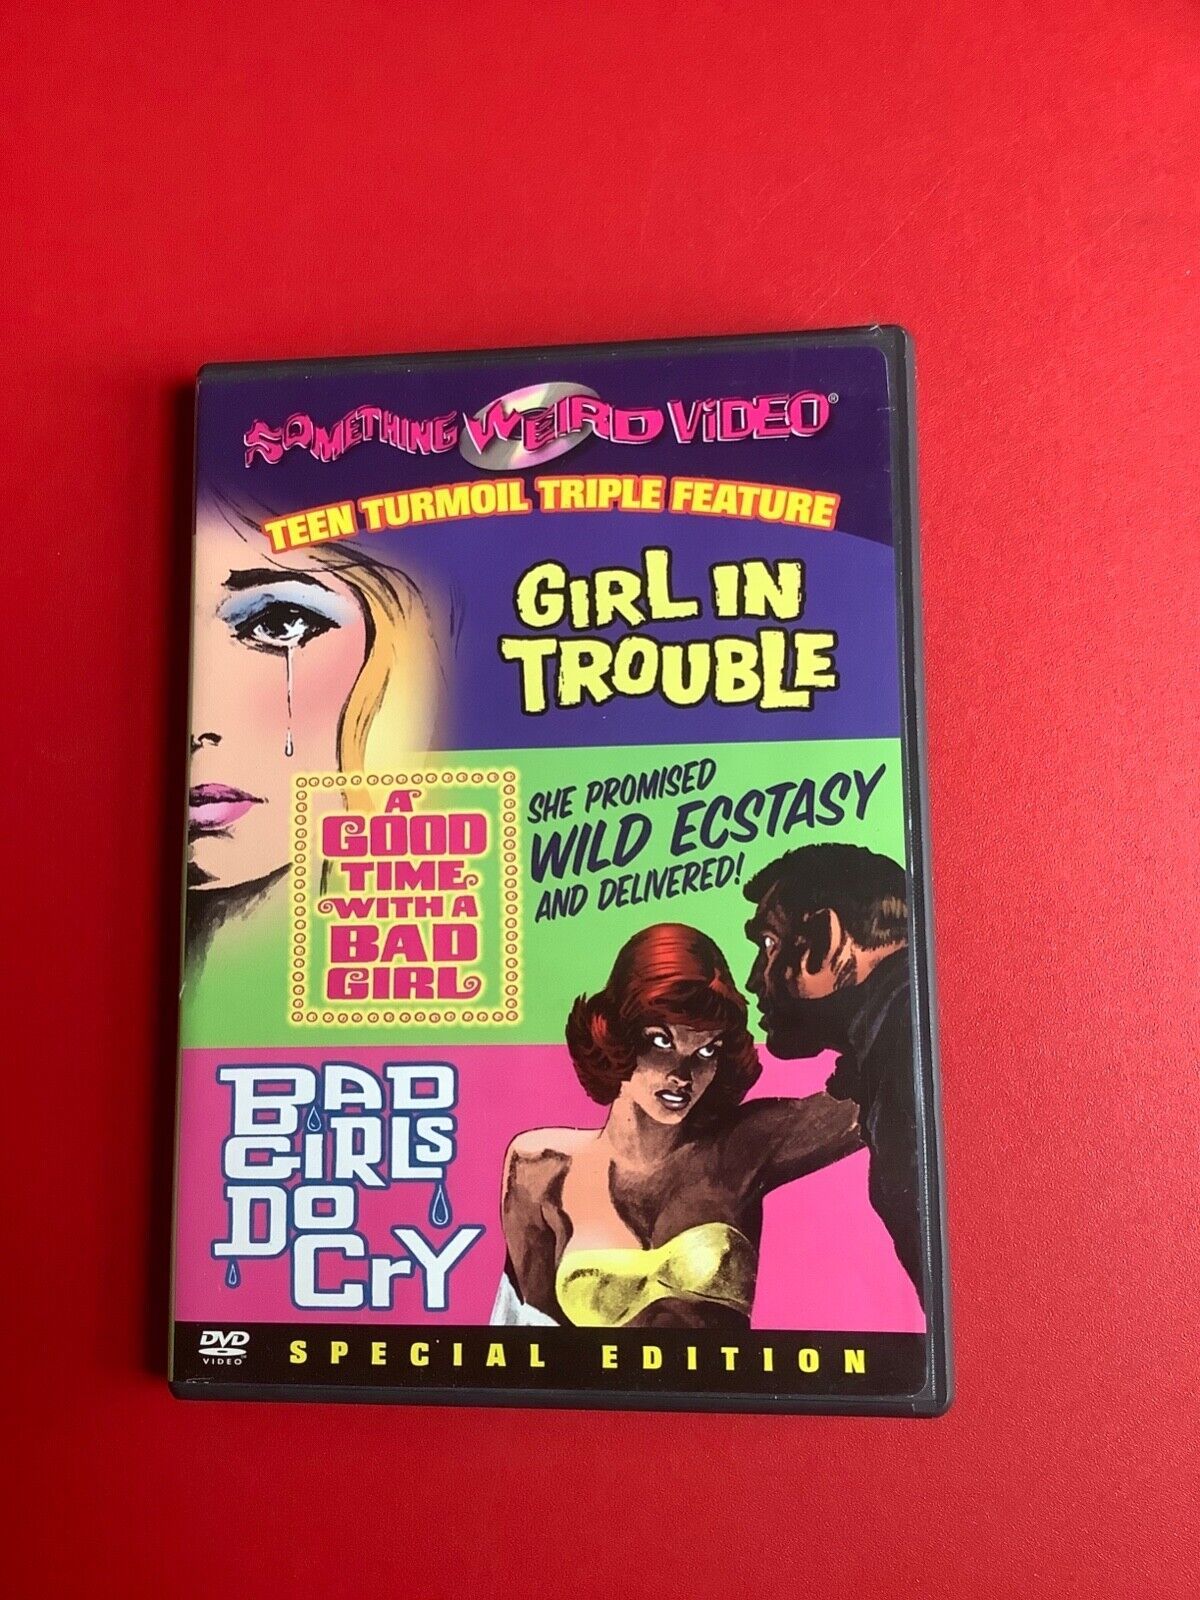 Primary image for Girl in Trouble / A Good Time with a Bad Girl / Bad Girls Do Cry something weIrd